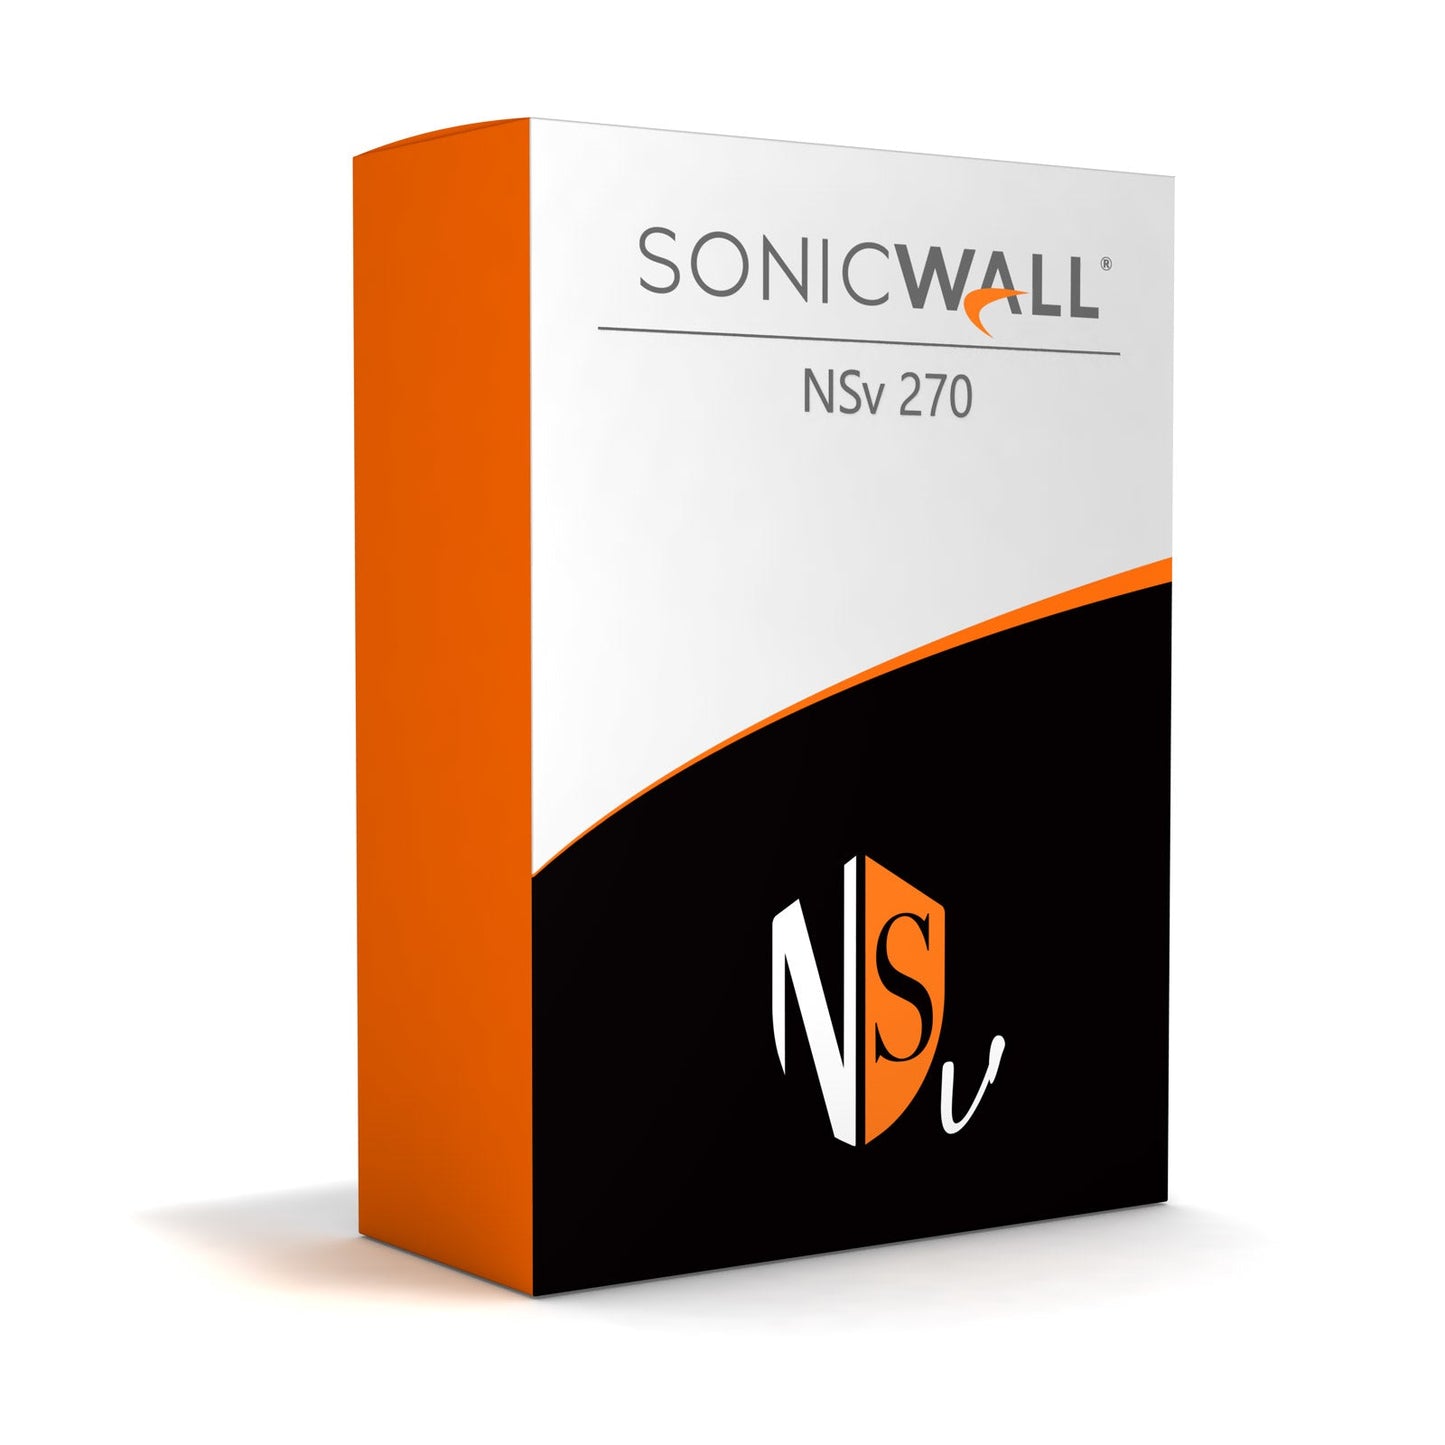 Sonicwall 02-Ssc-6098 Firewall Software 5 Year(S) 1 License(S)